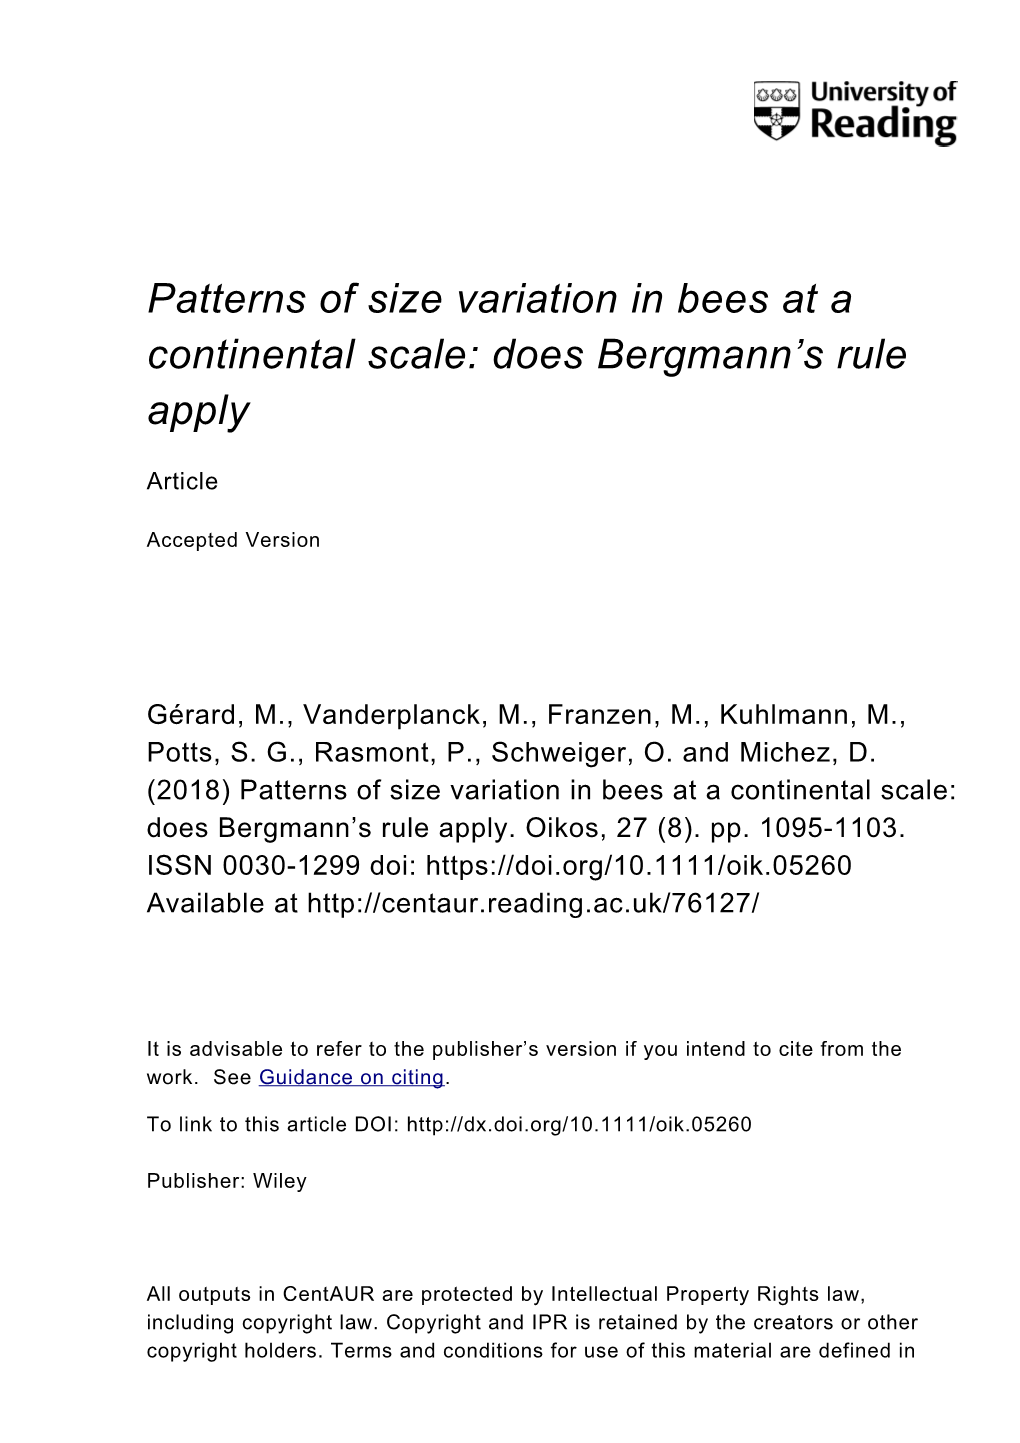 Patterns of Size Variation in Bees at a Continental Scale: Does Bergmann's